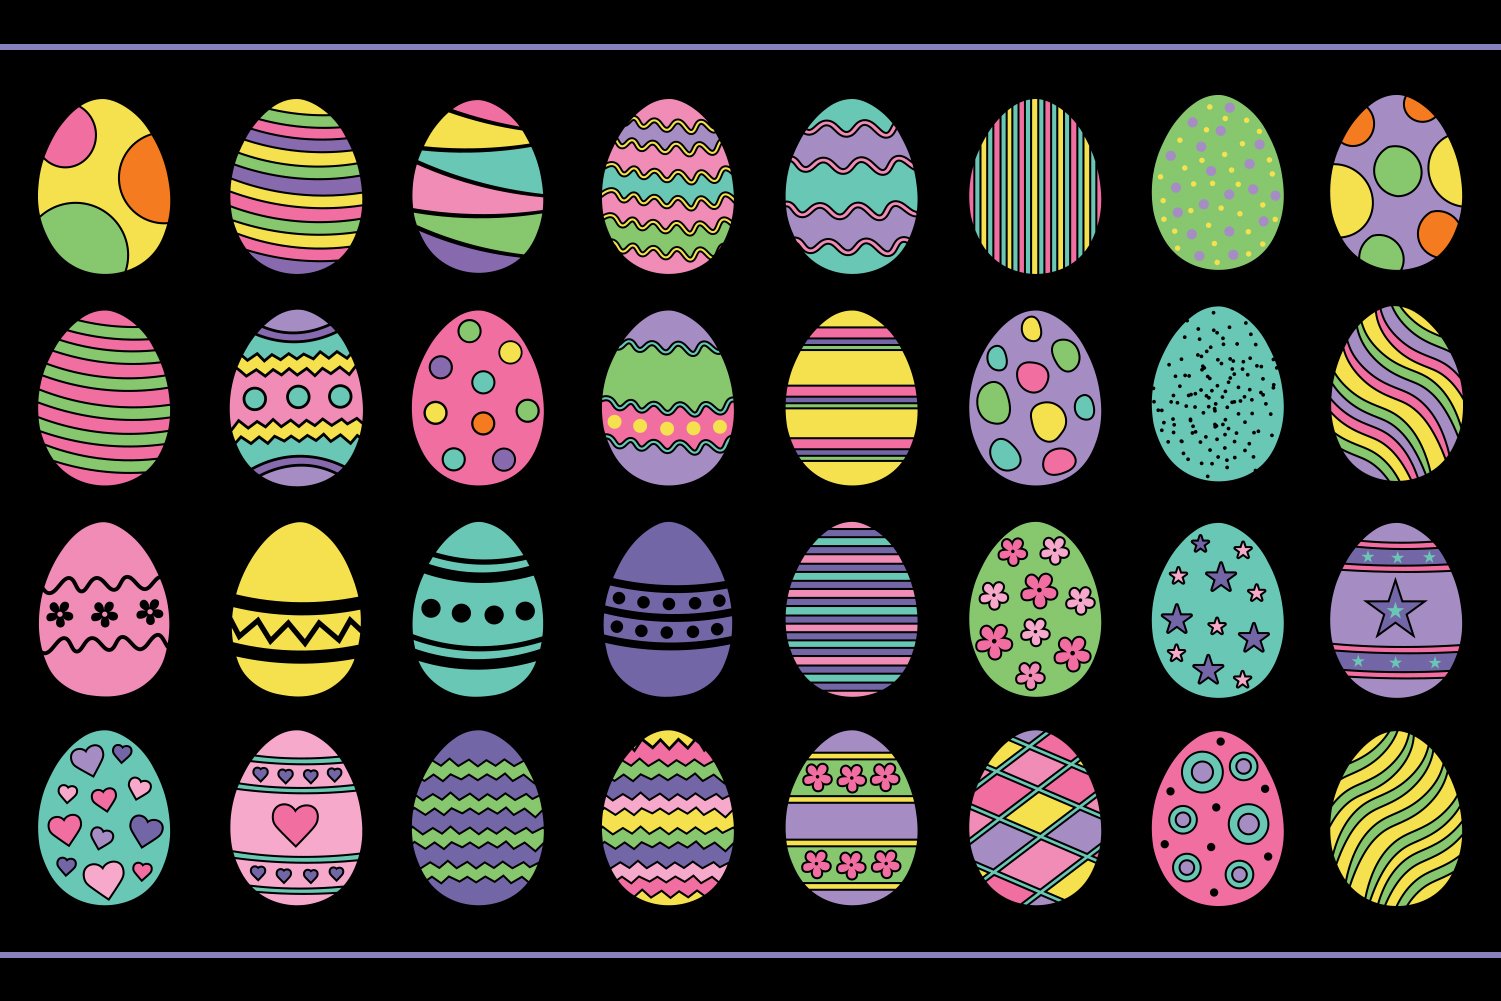 Black background with colorful eggs.